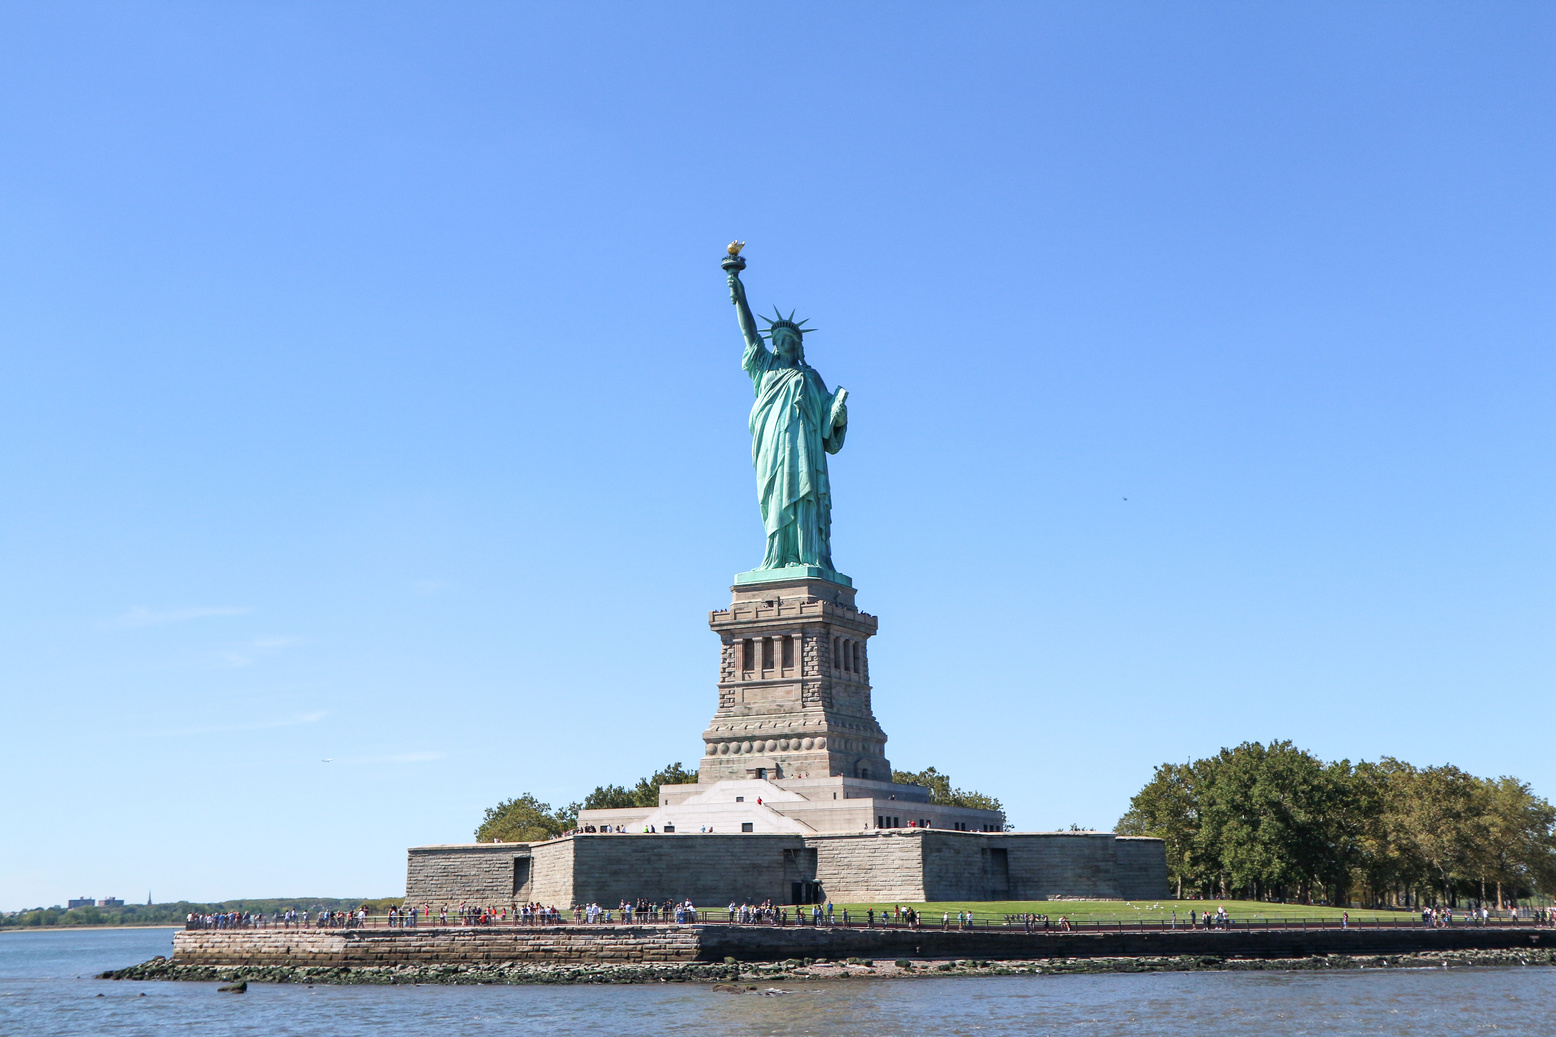 Statue of Liberty in the USA